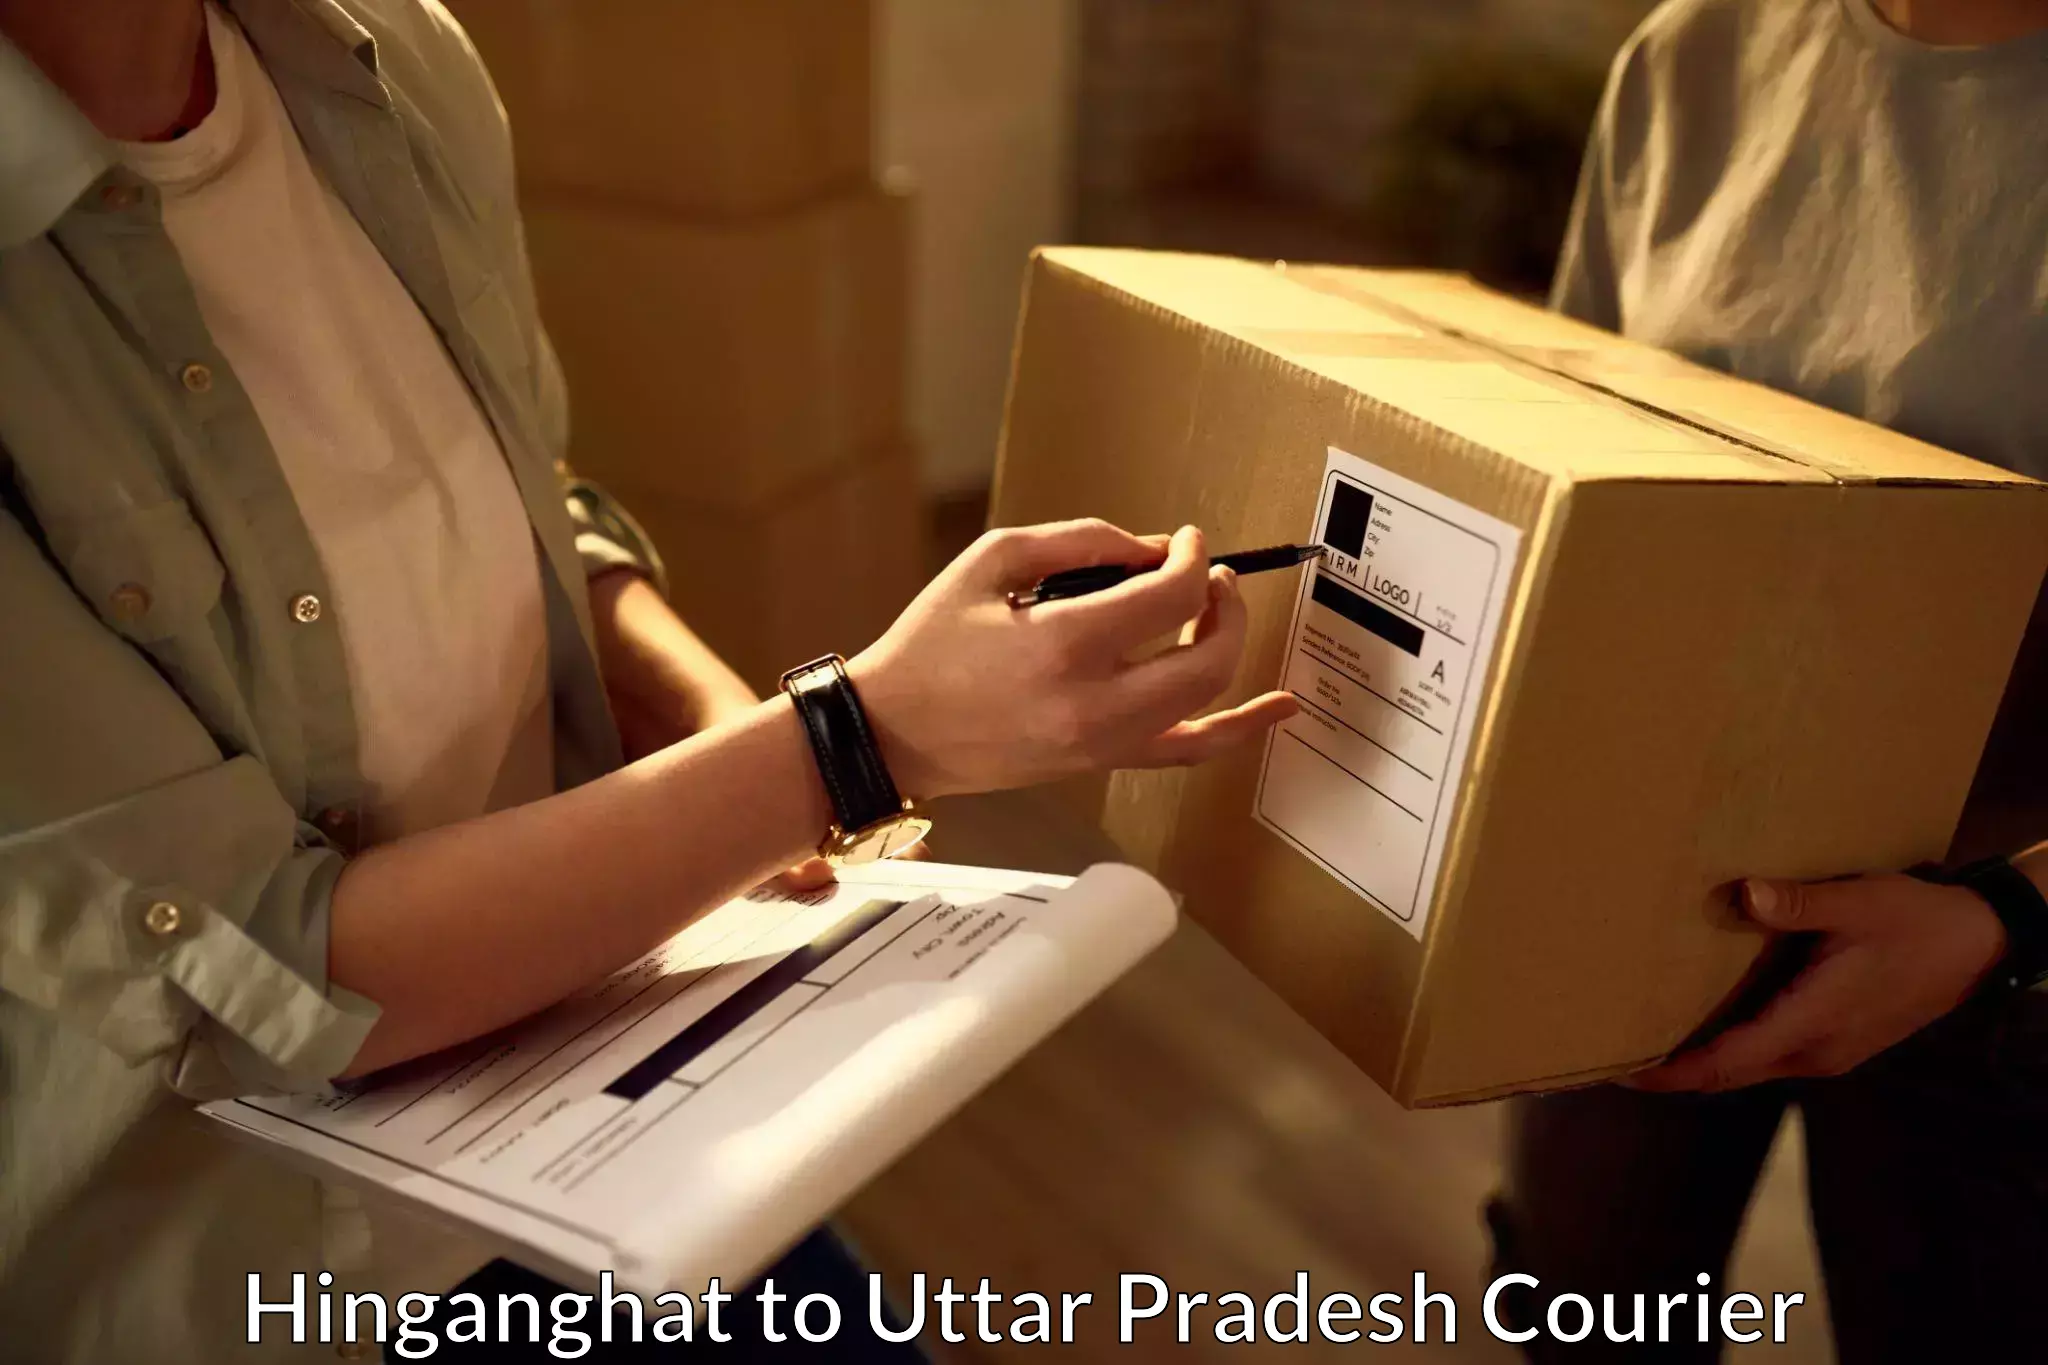 Professional courier handling Hinganghat to Agra